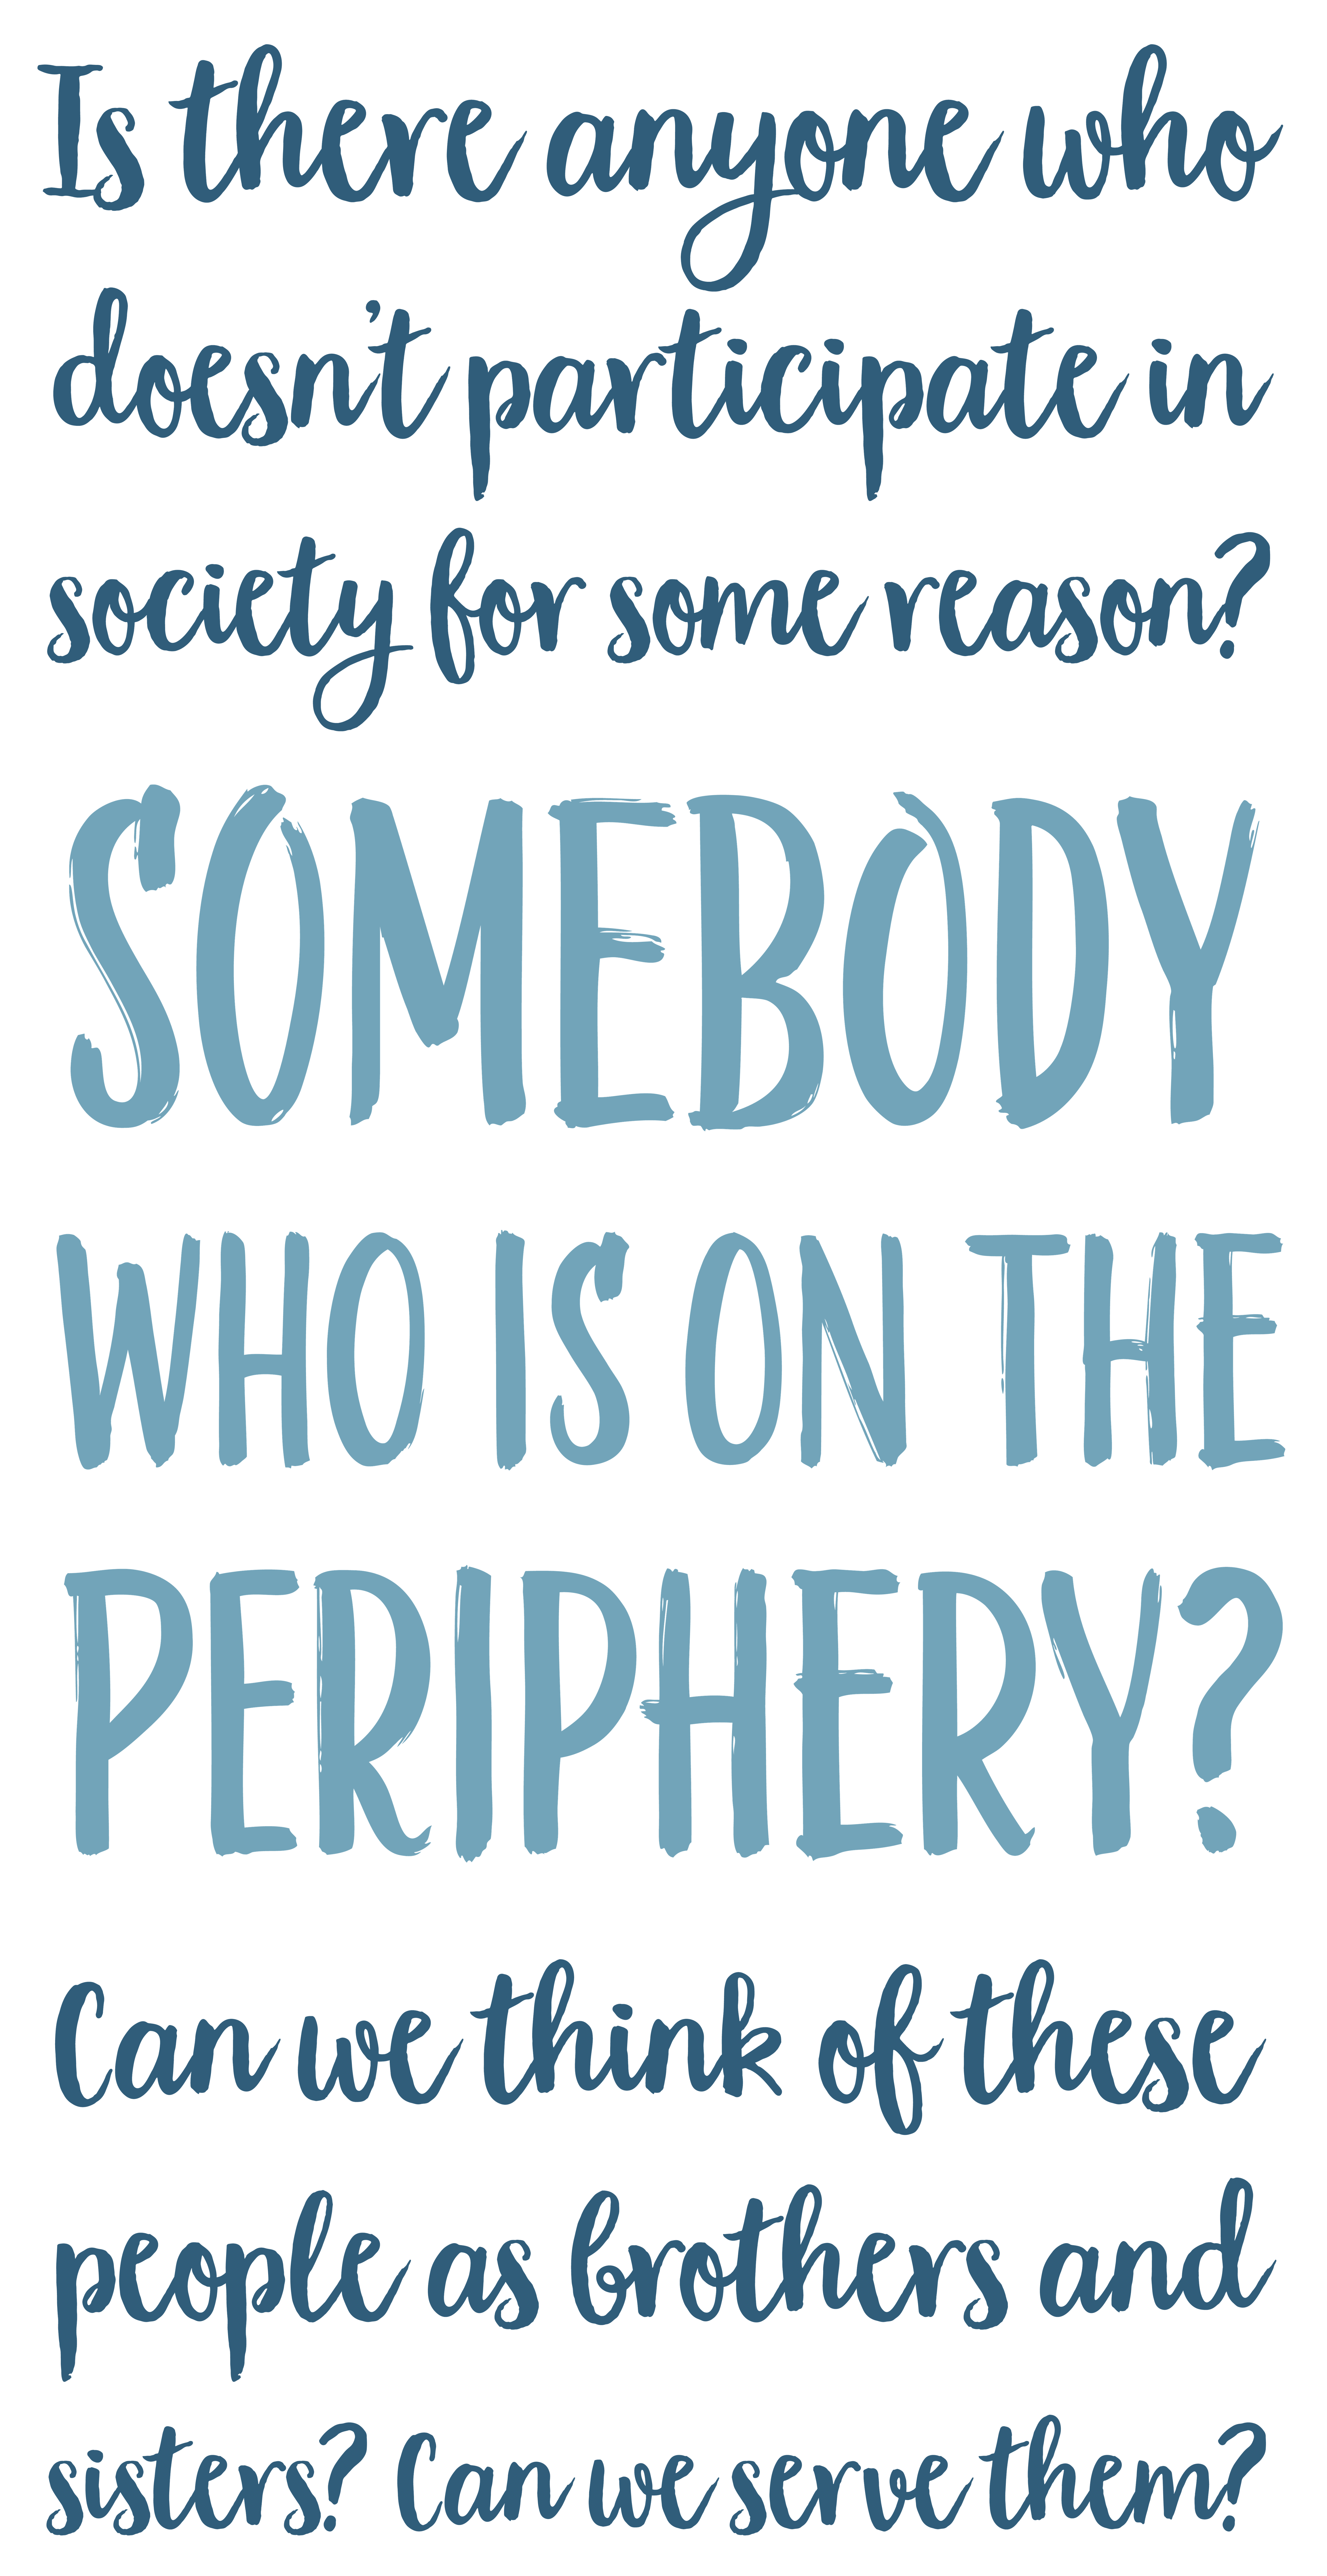 Typographic treatment of pull quote: "Is there anyone who doesn't participate in society for some reason? Somebody who is on the periphery? Can we think of these people as brothers and sisters? Can we serve them?